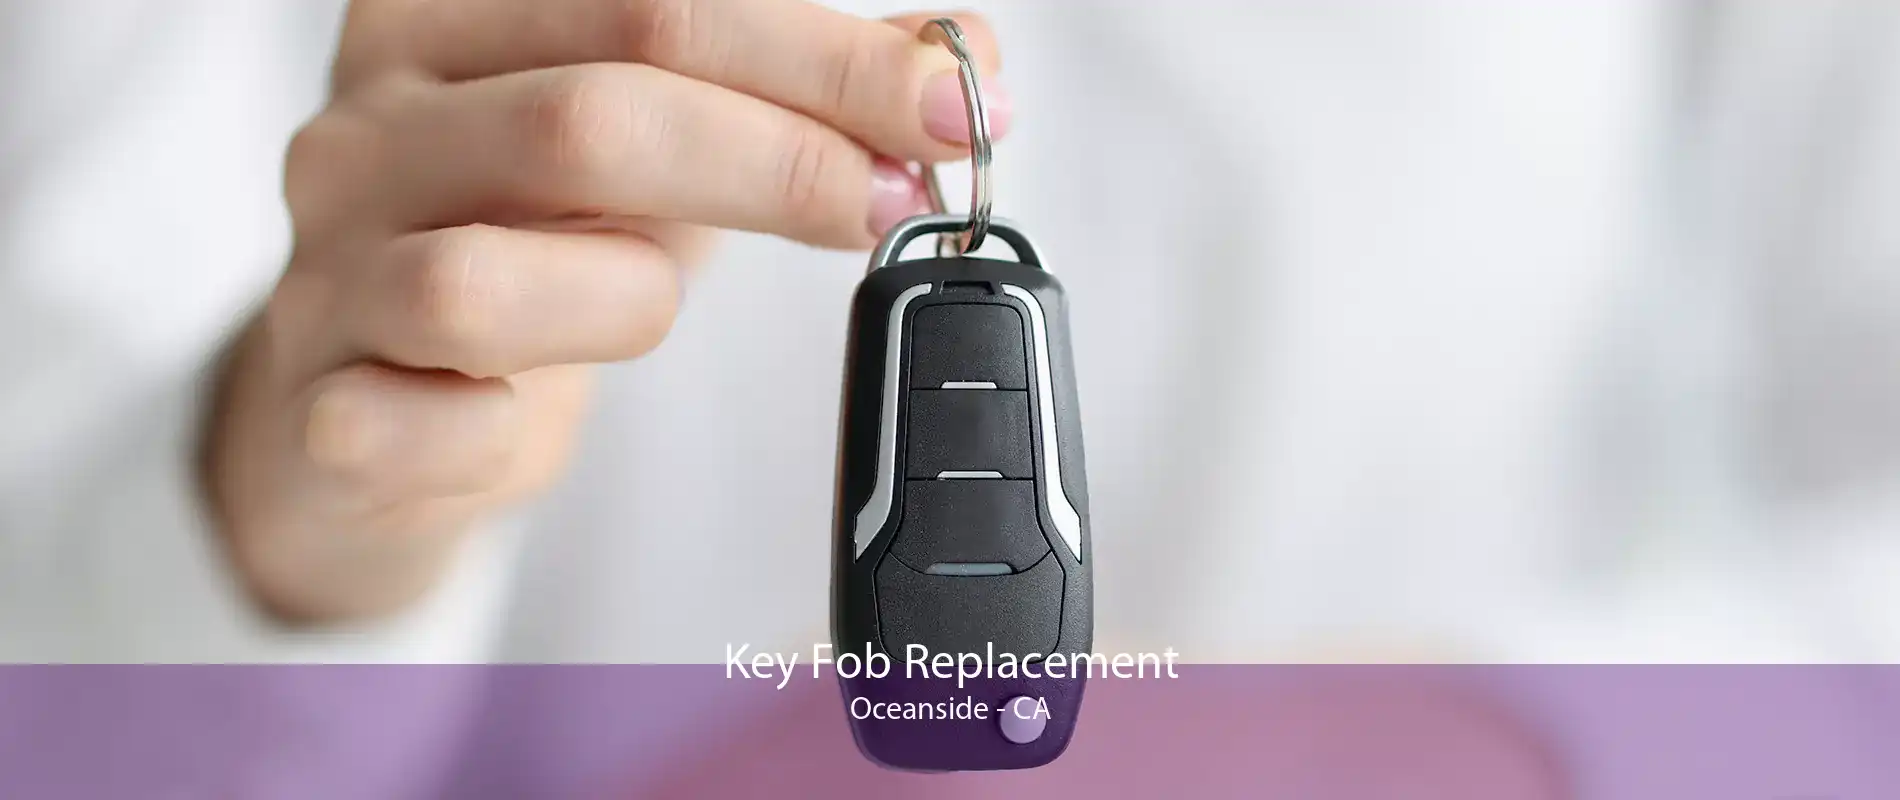 Key Fob Replacement Oceanside - CA